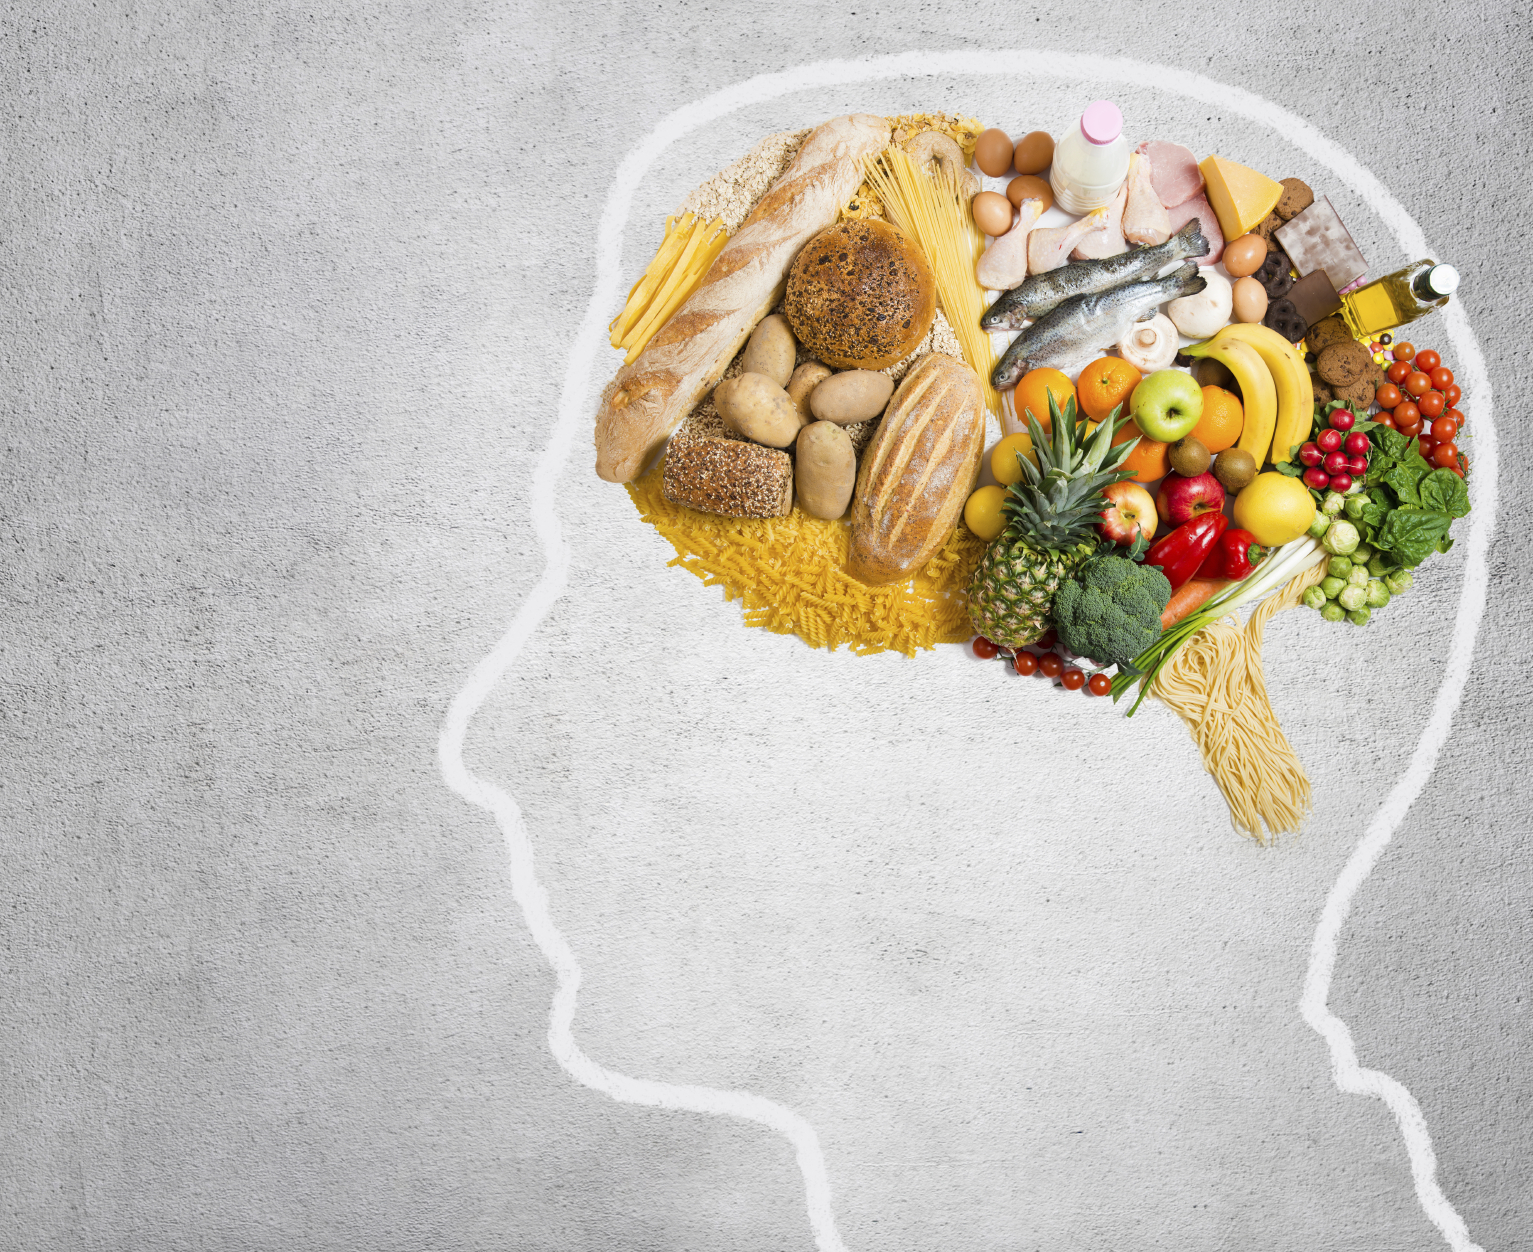 An outline of a brain is filled with colorful, healthy foods, indicating the link between nutrition and dementia.